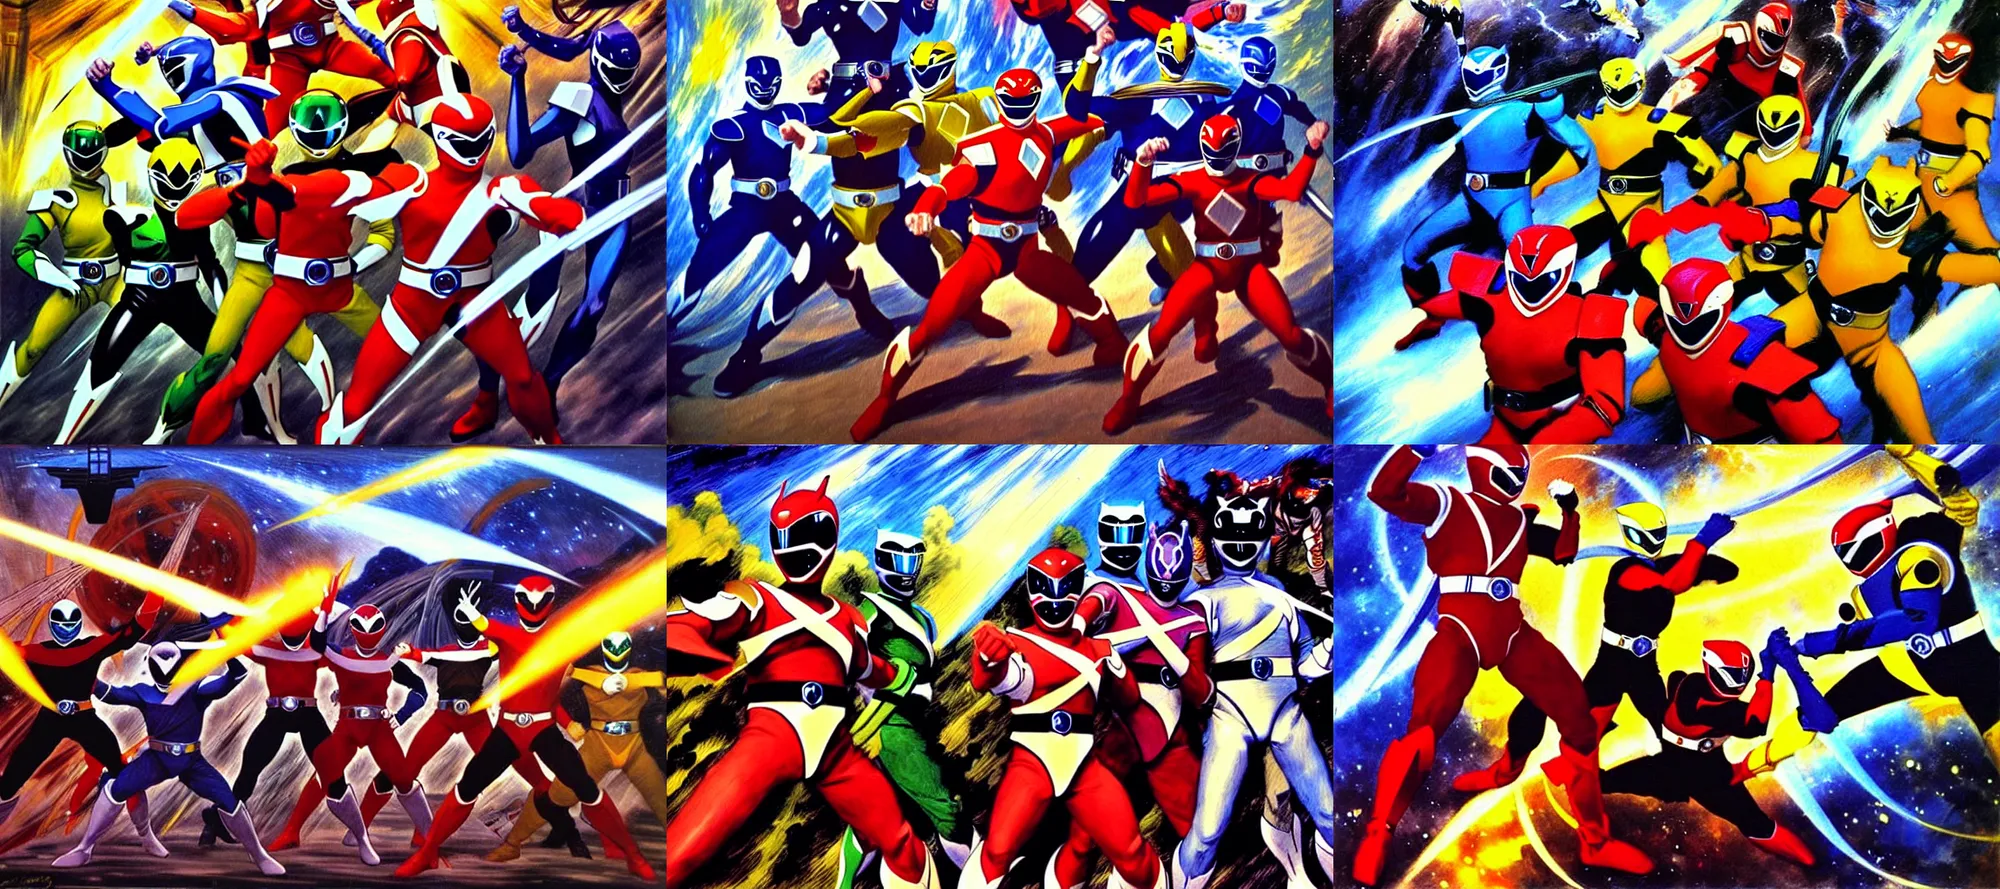 100+] Power Rangers Pictures | Wallpapers.com